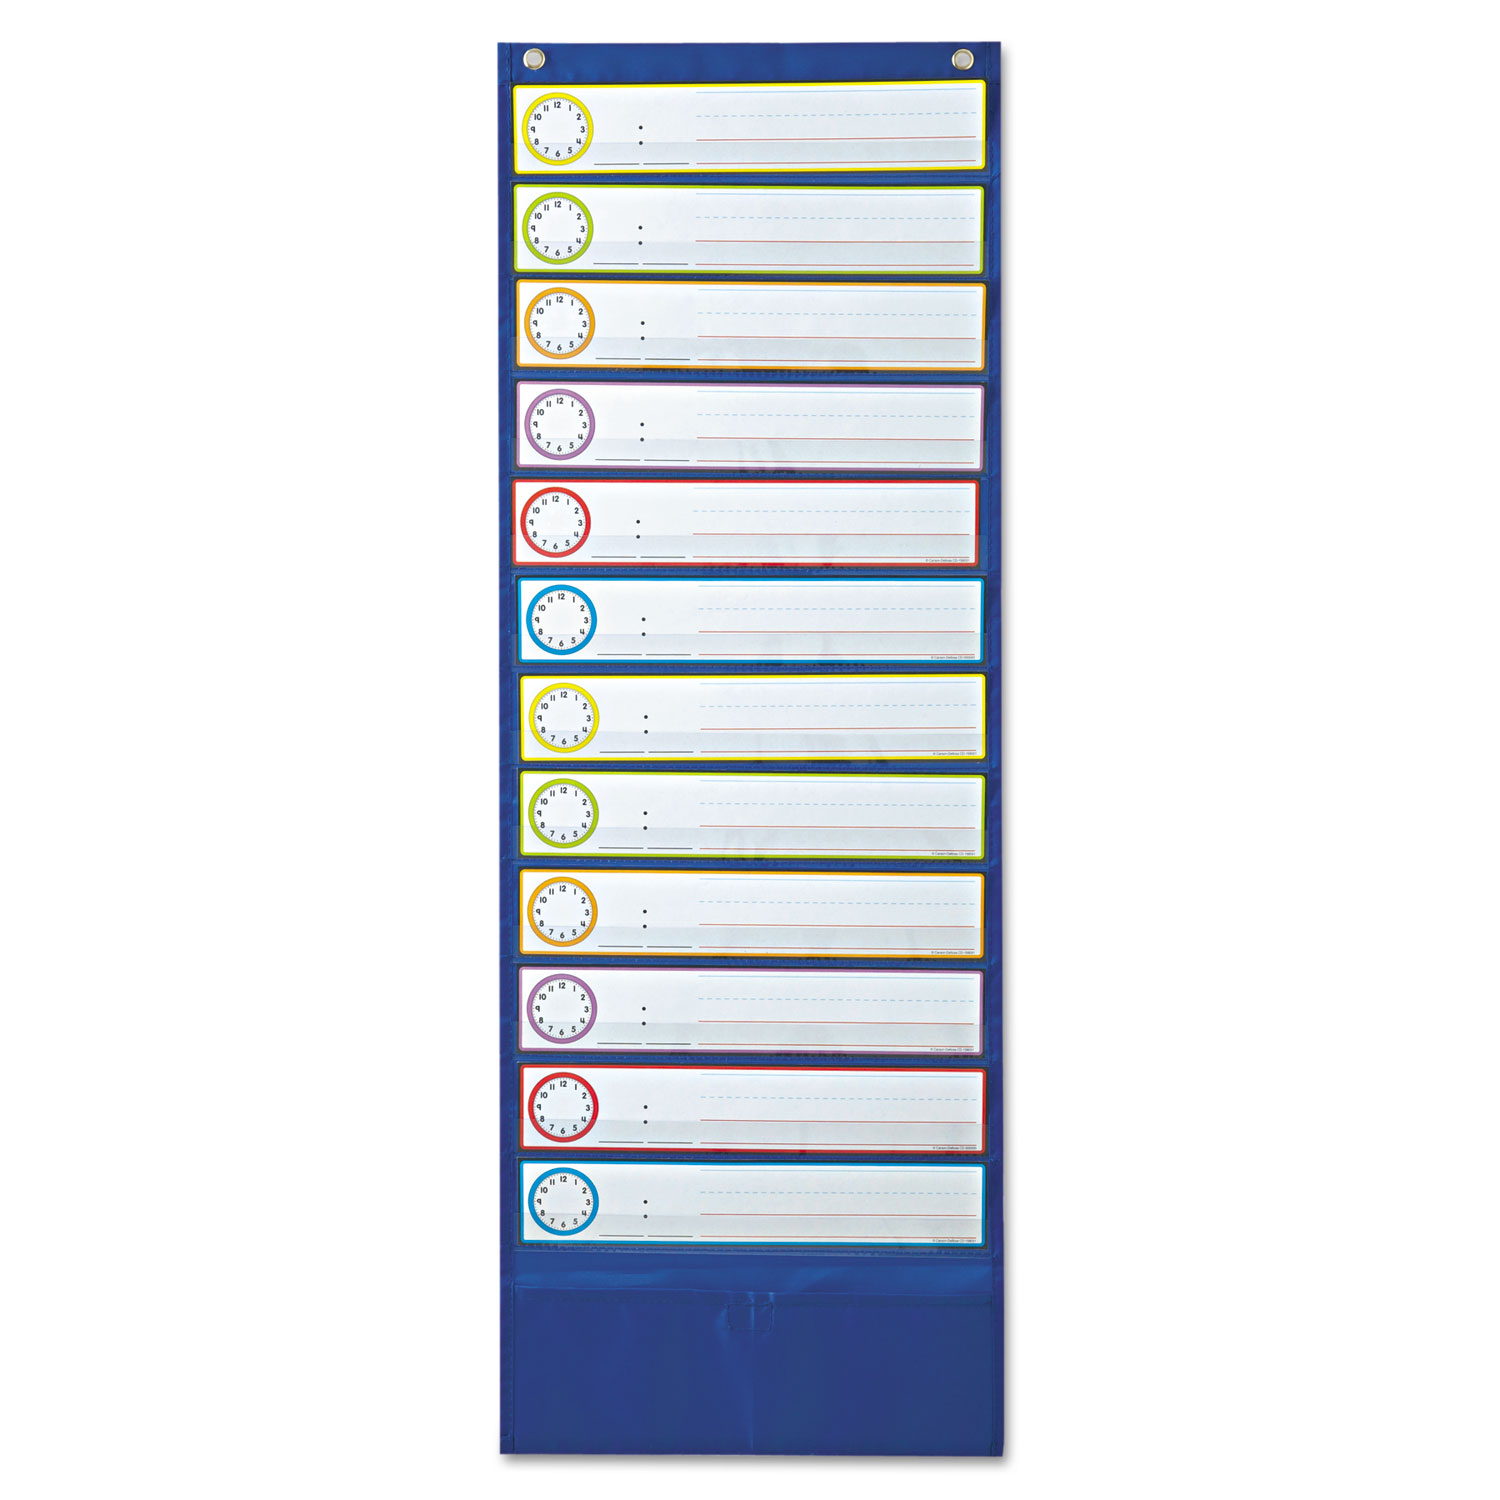 Deluxe Scheduling Pocket Chart, 12 Pockets, 13 x 36